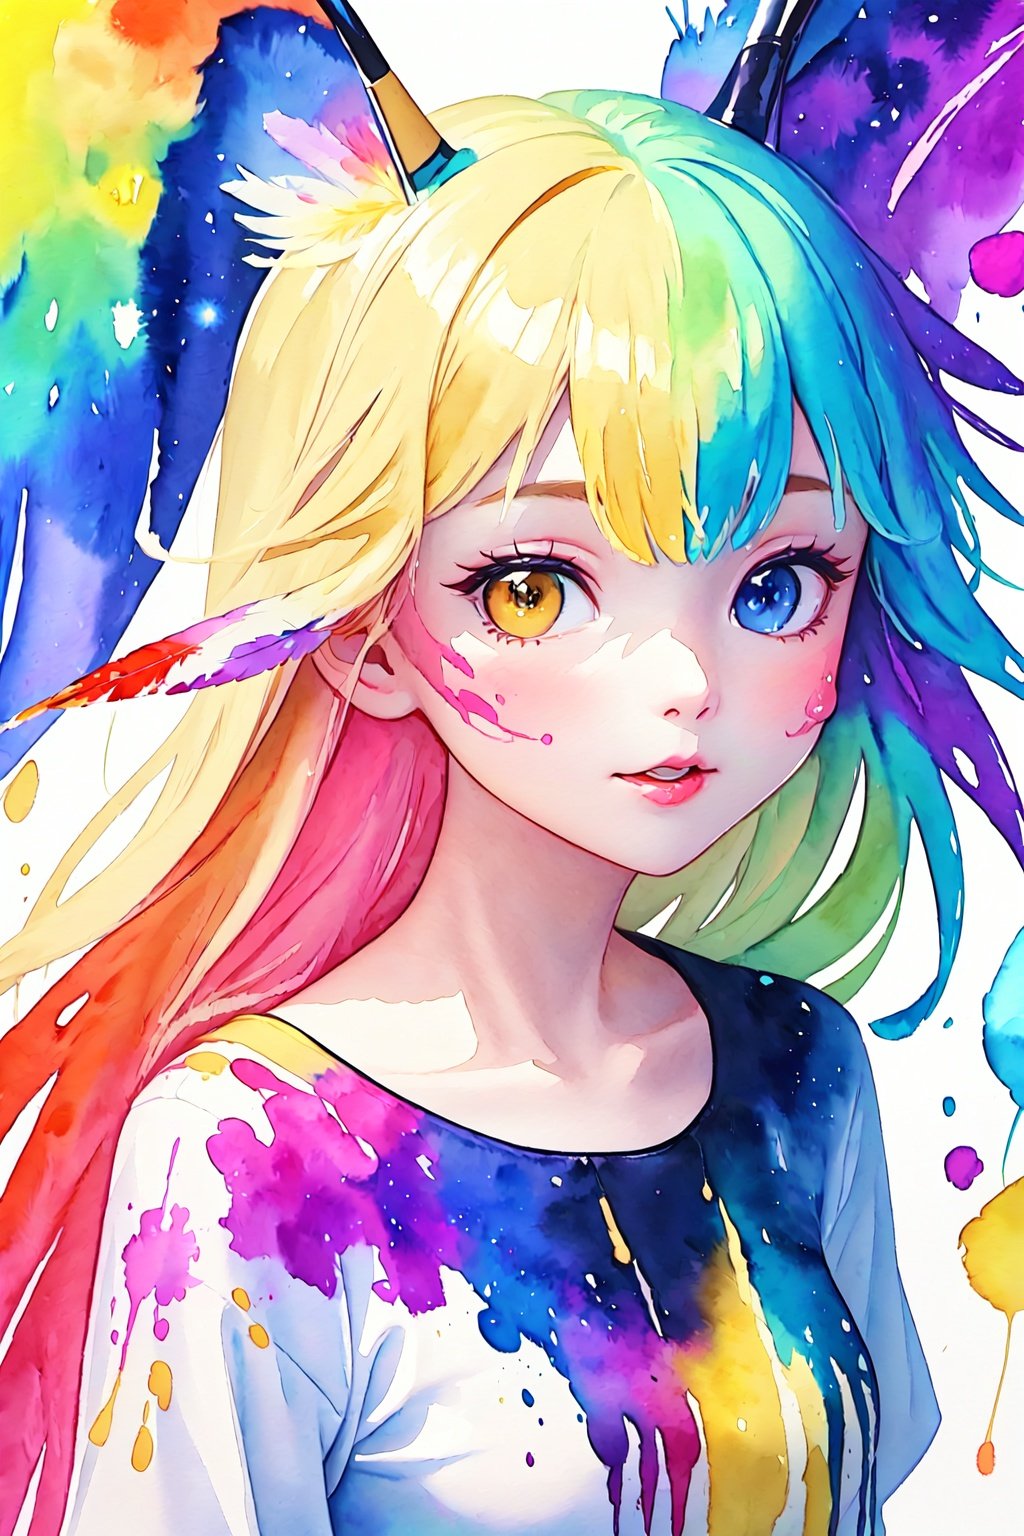  (from front1.2),(paint effect:1.3), ((lots of galaxy+watercolor color feathers):1.3), (mixed rainbow color), flowing, (Melted, splashed ink)
, cute face, upper body, decorative art, (Heterochromatic<(red, yellow)>:1.2), 
, secai, ZYM